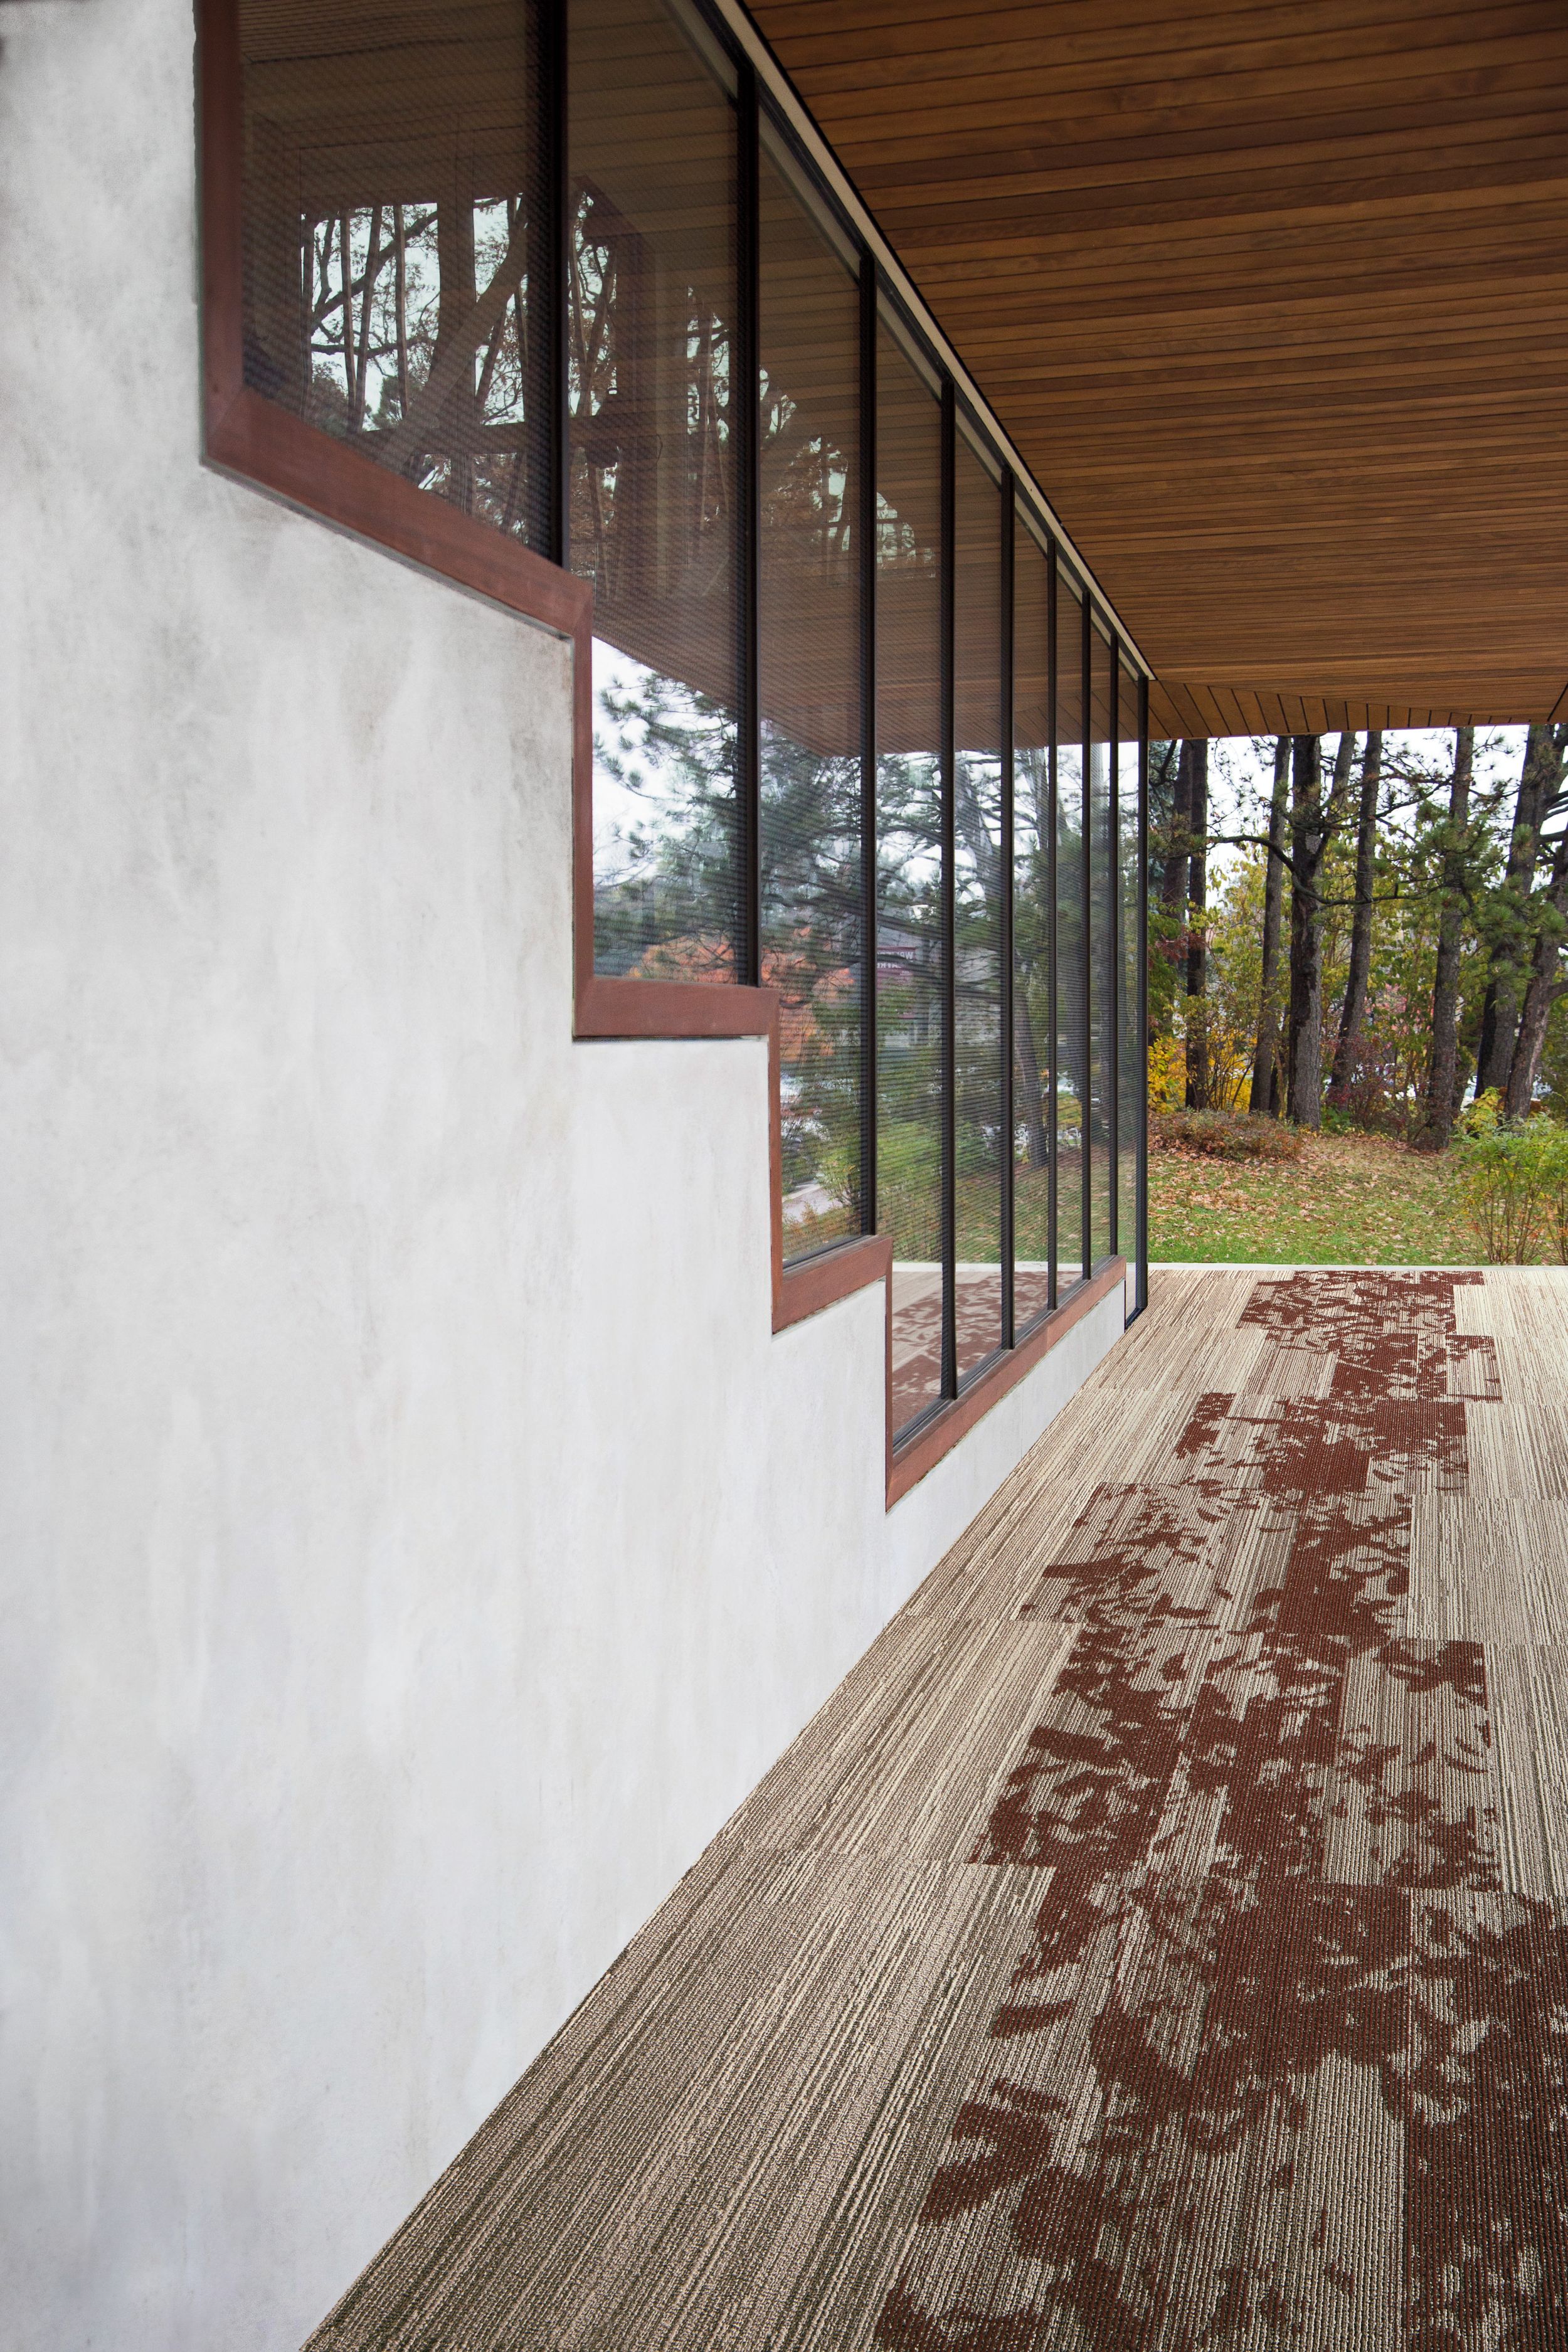 Interface Progression III and Glazing plank carpet tile shown for inspiration in outdoor setting numéro d’image 8